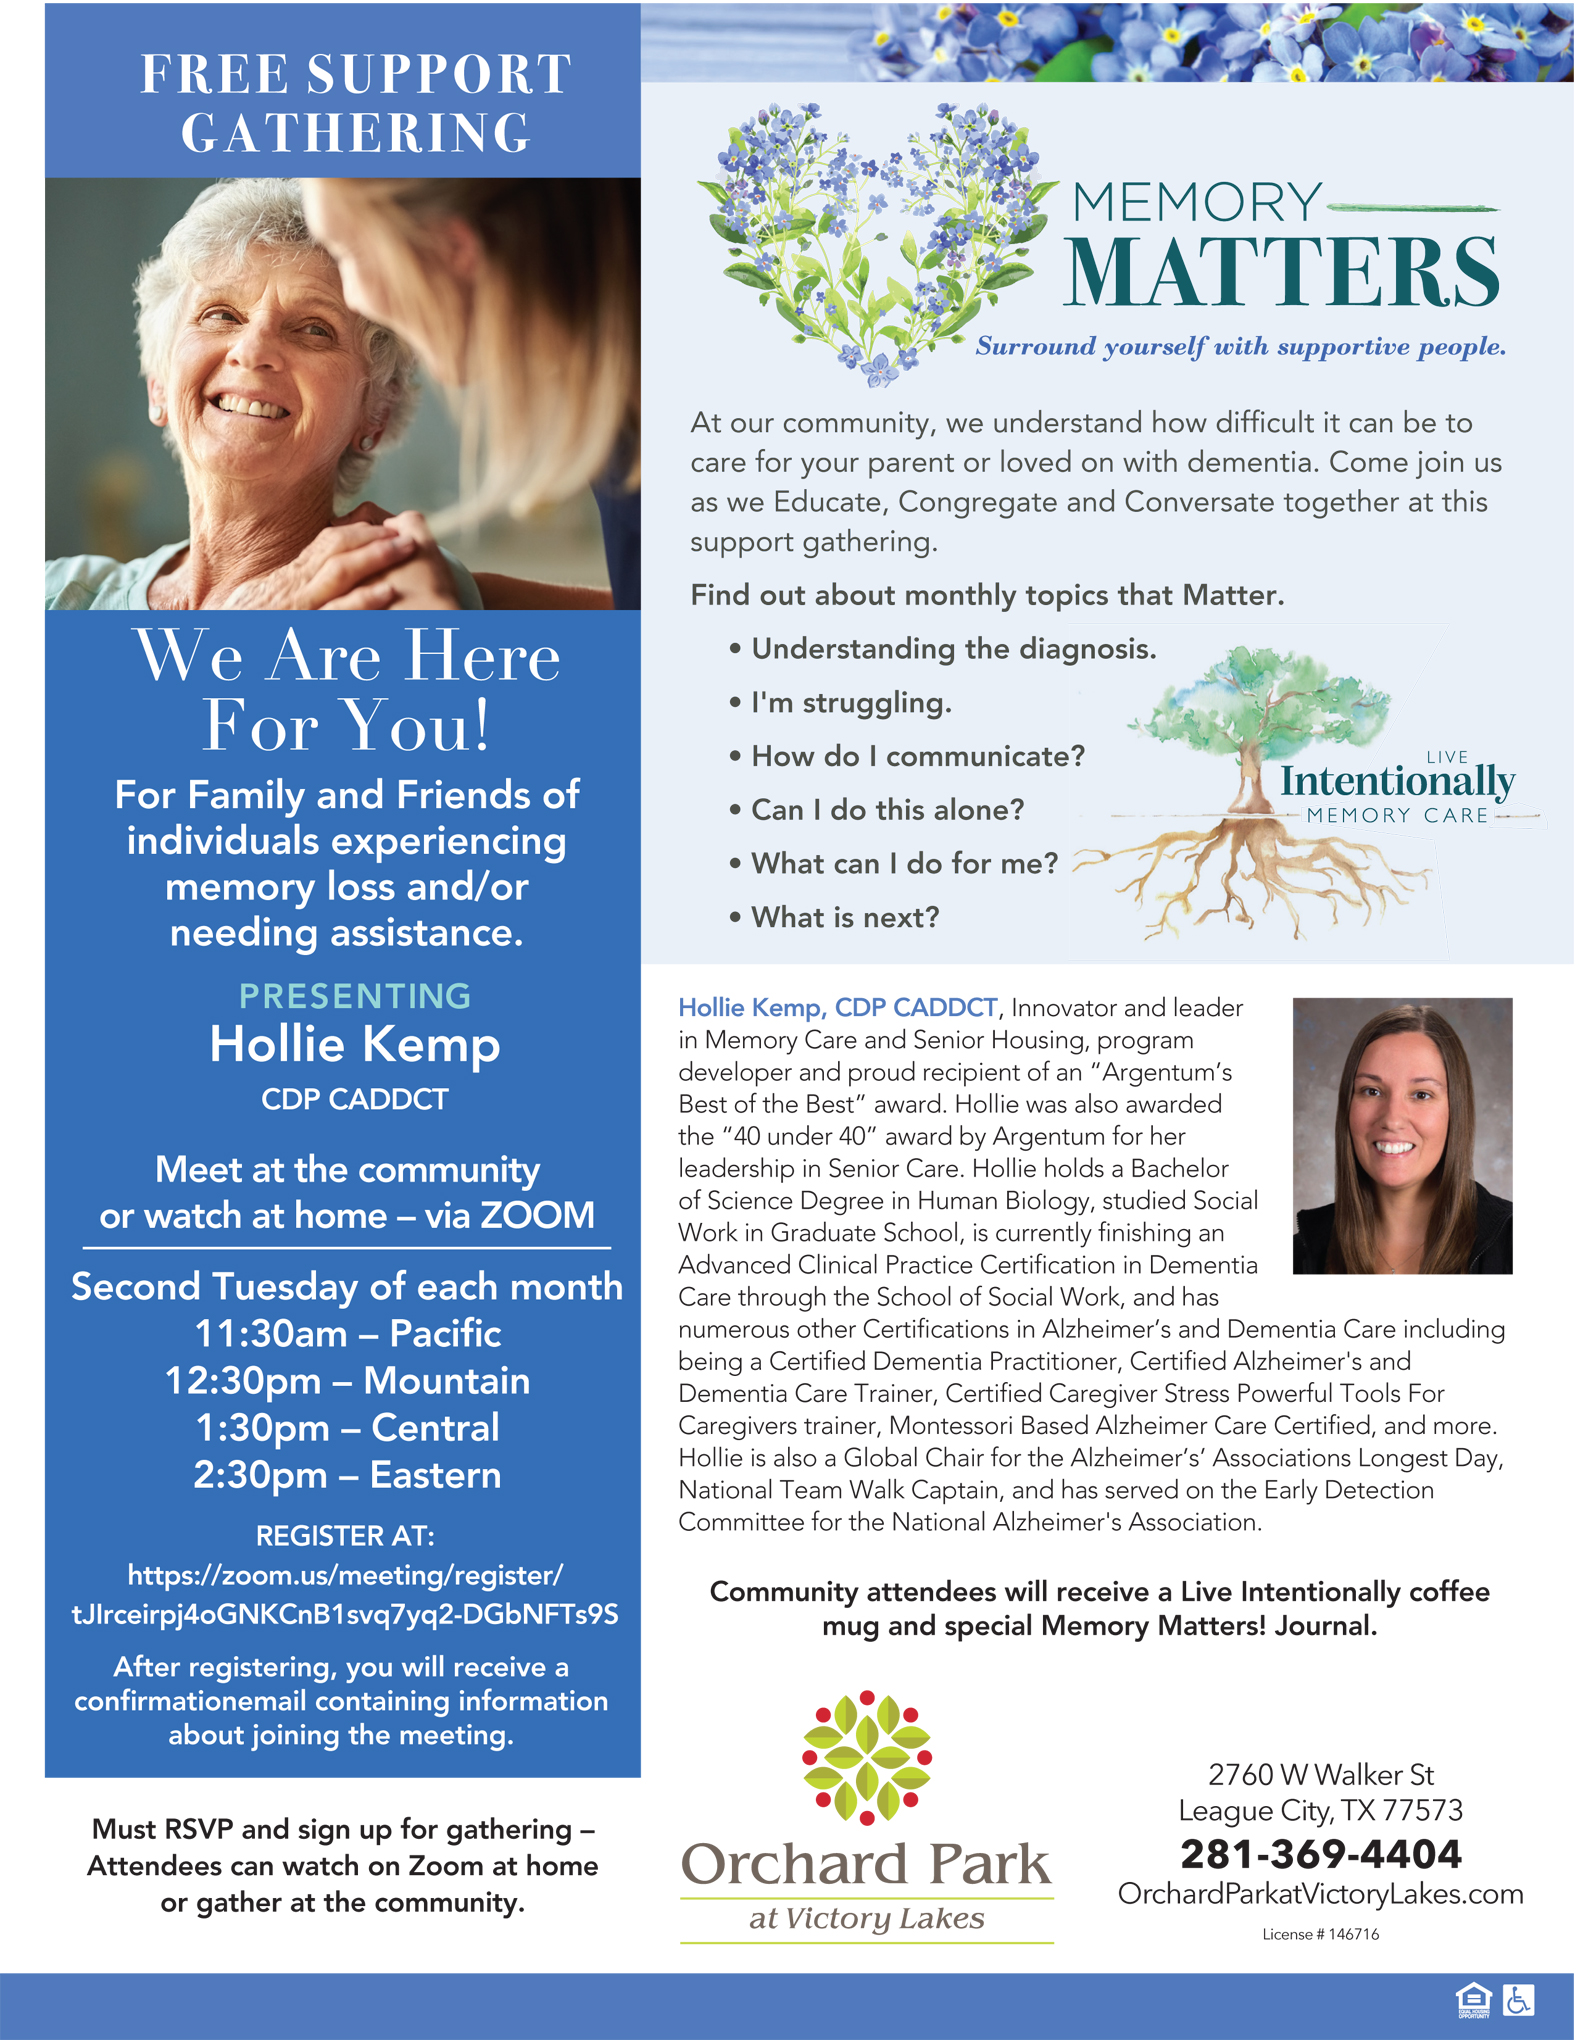 OP Victory Lakes Memory Matter support group flyer